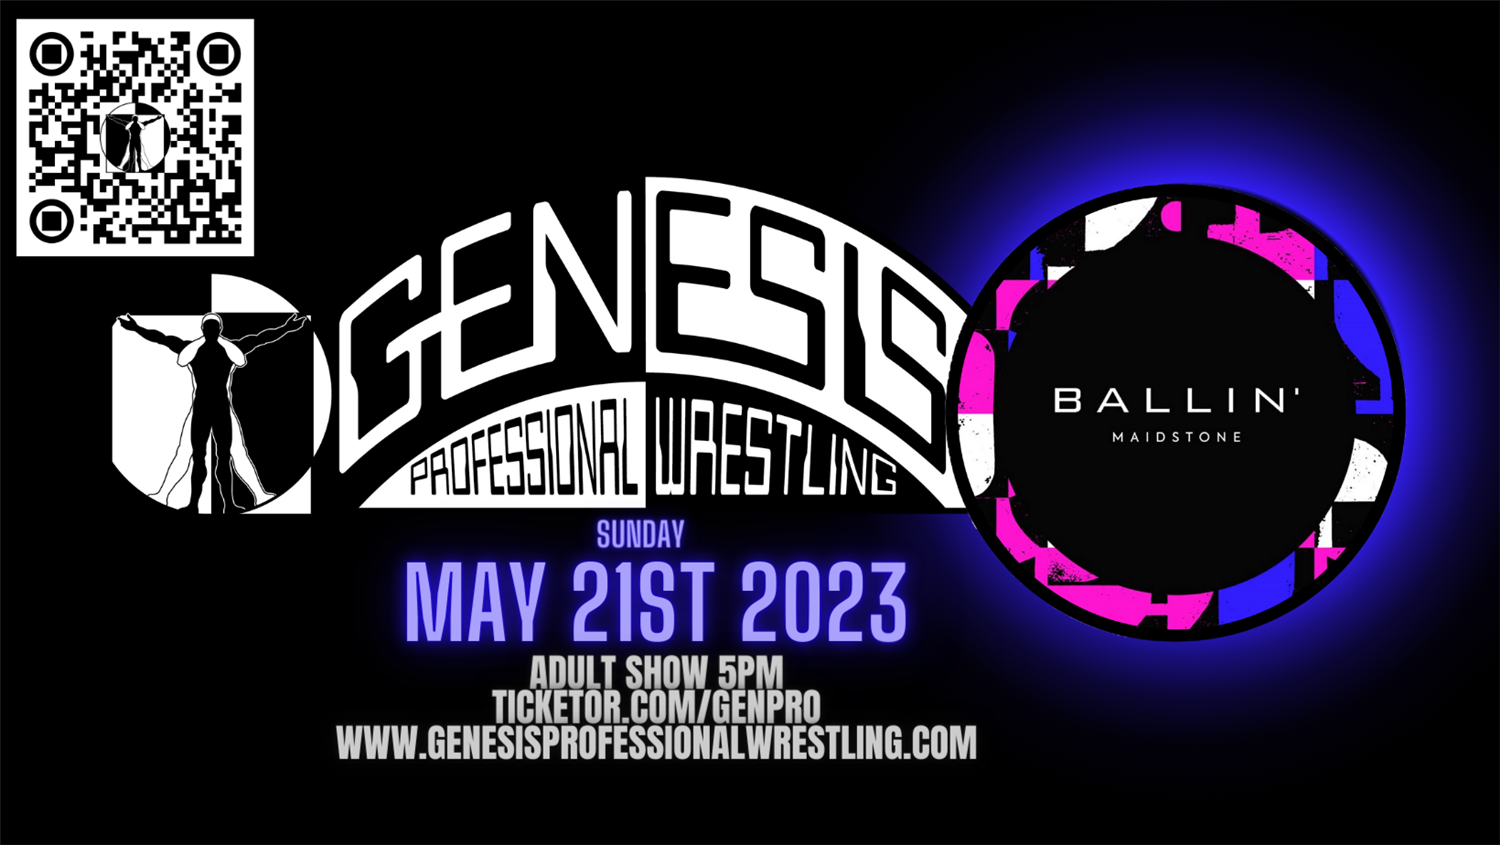 Genesis Professional Wrestling Adult Show Ballin' Maidstone, Adult Show 5pm on May 21, 17:00@Ballin' - Pick a seat, Buy tickets and Get information on Genesis Professional Wrestling 